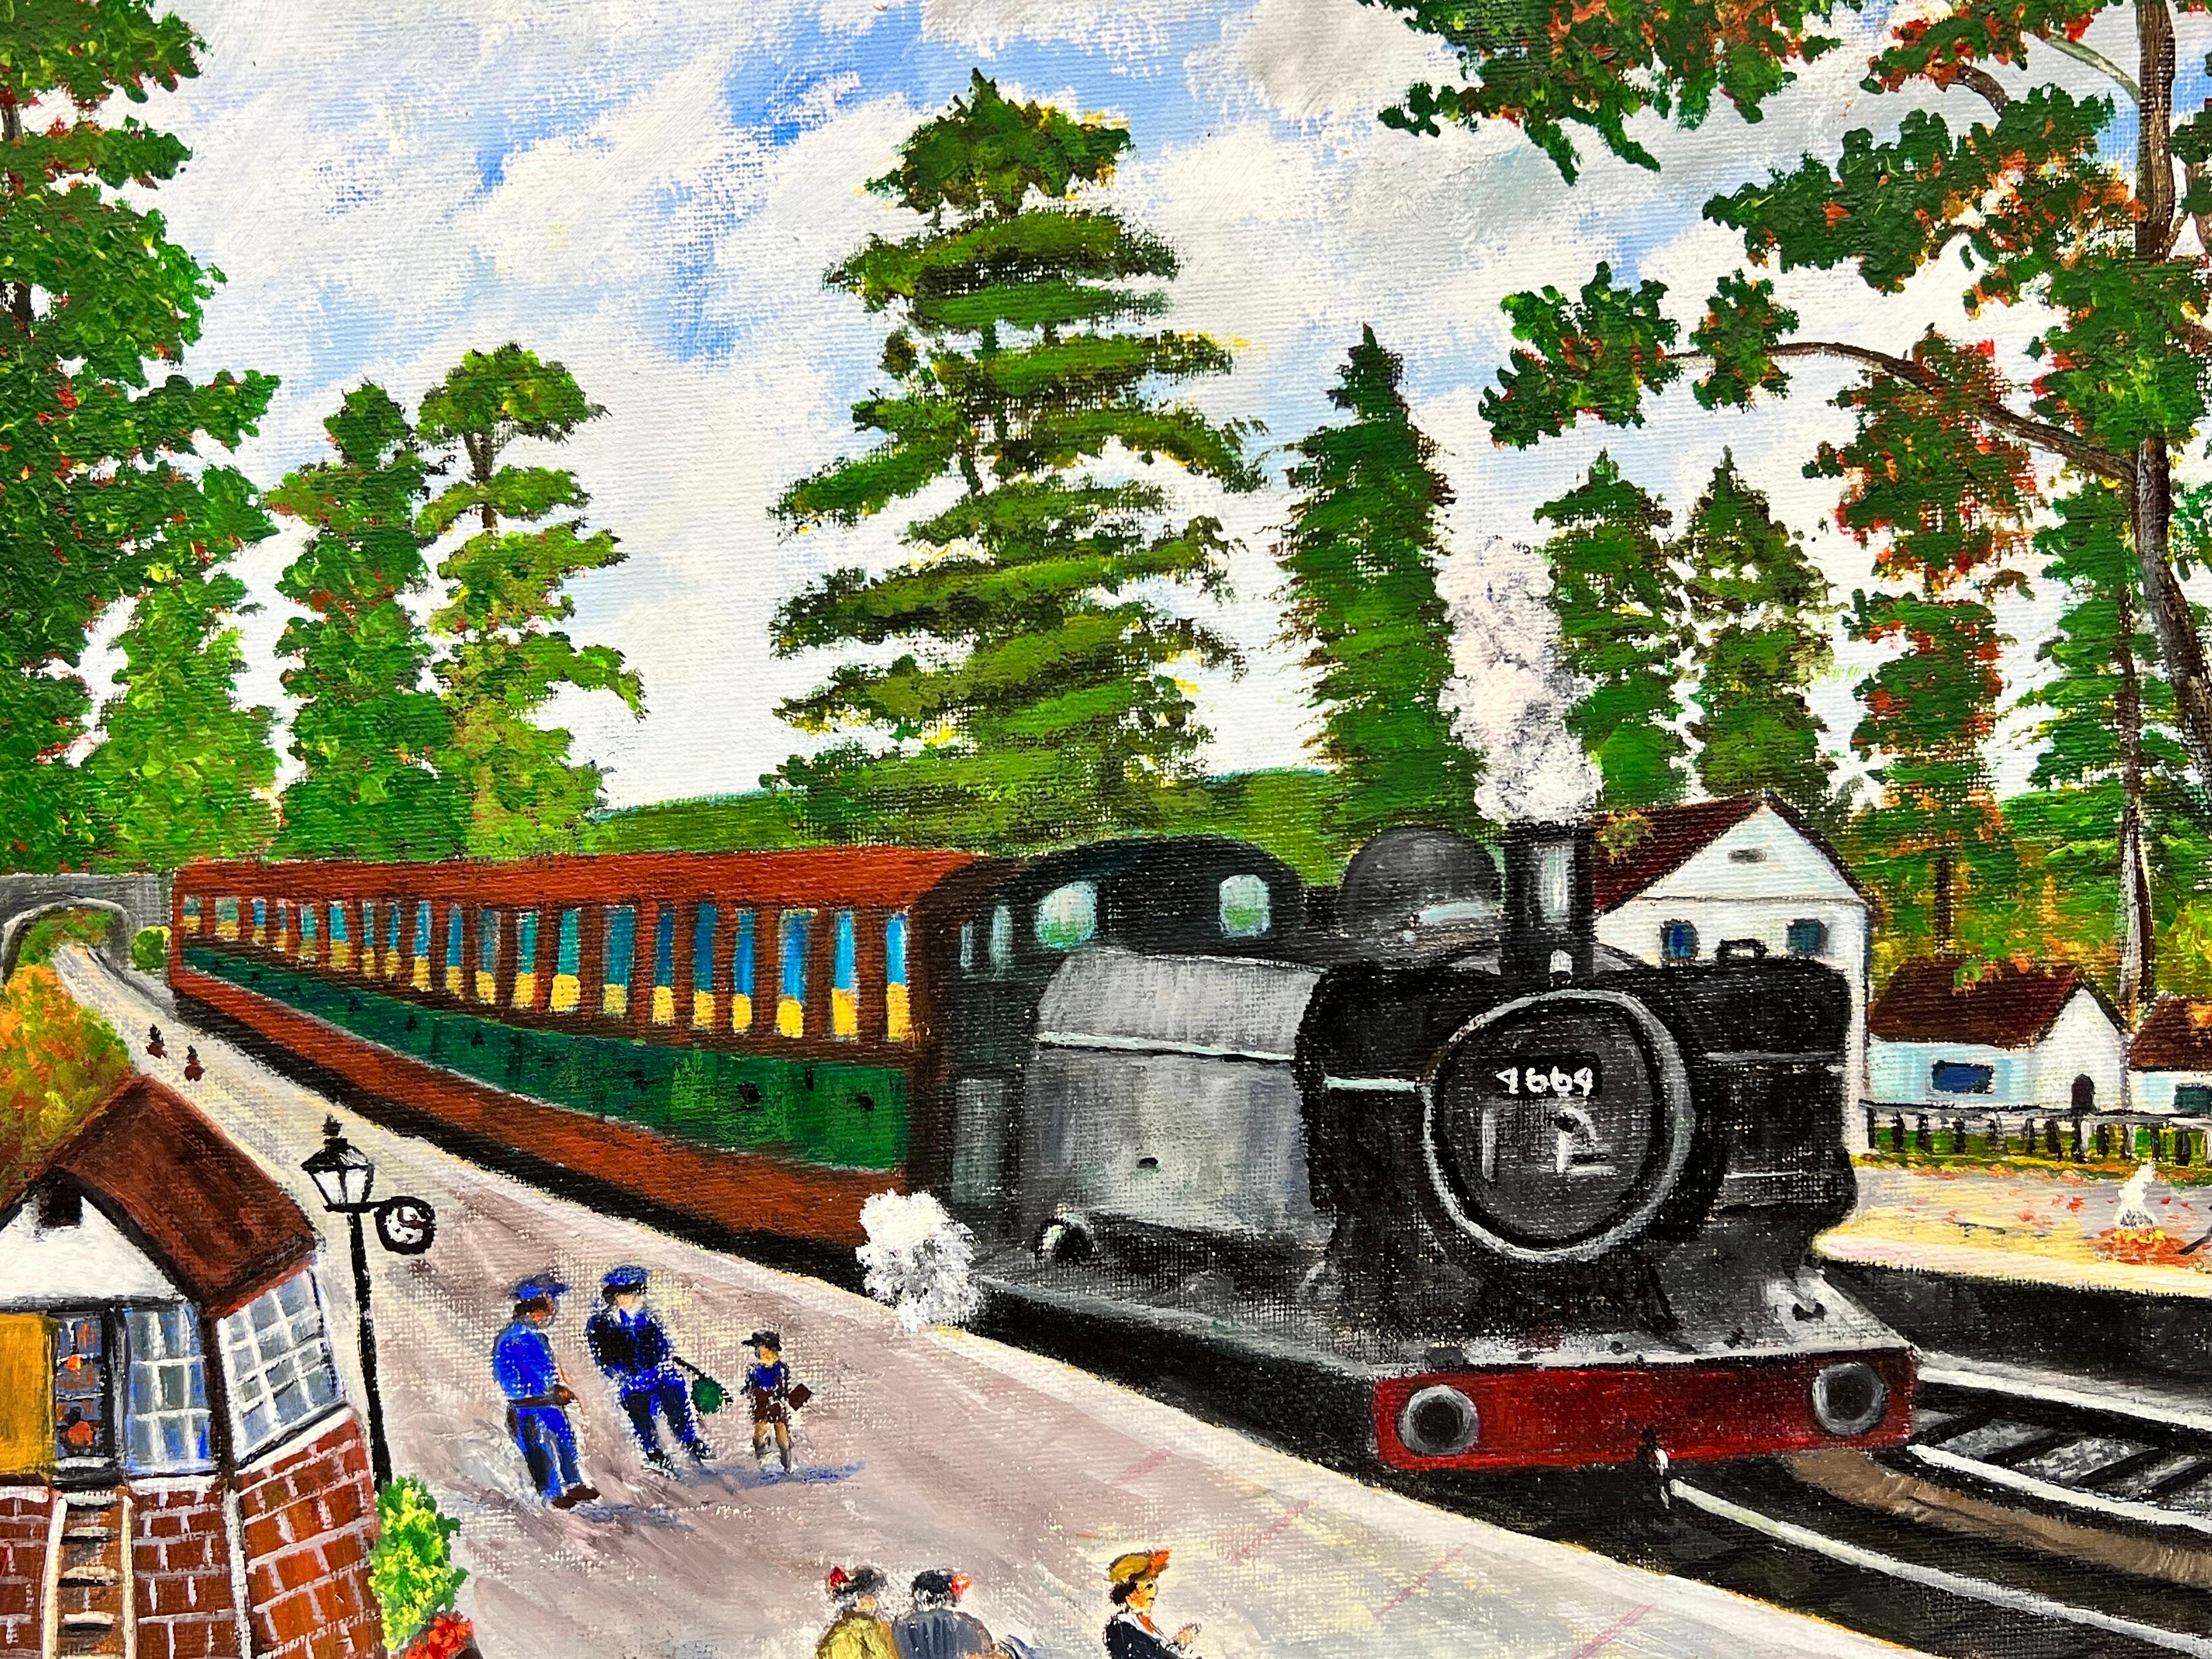 Bromyard Train Station
by Ben George Powell, British contemporary artist
signed
acrylic on canvas, unframed
canvas: 16 x 20 inches
provenance: private collection of this artists work, UK
The painting is in very good and presentable condition.
